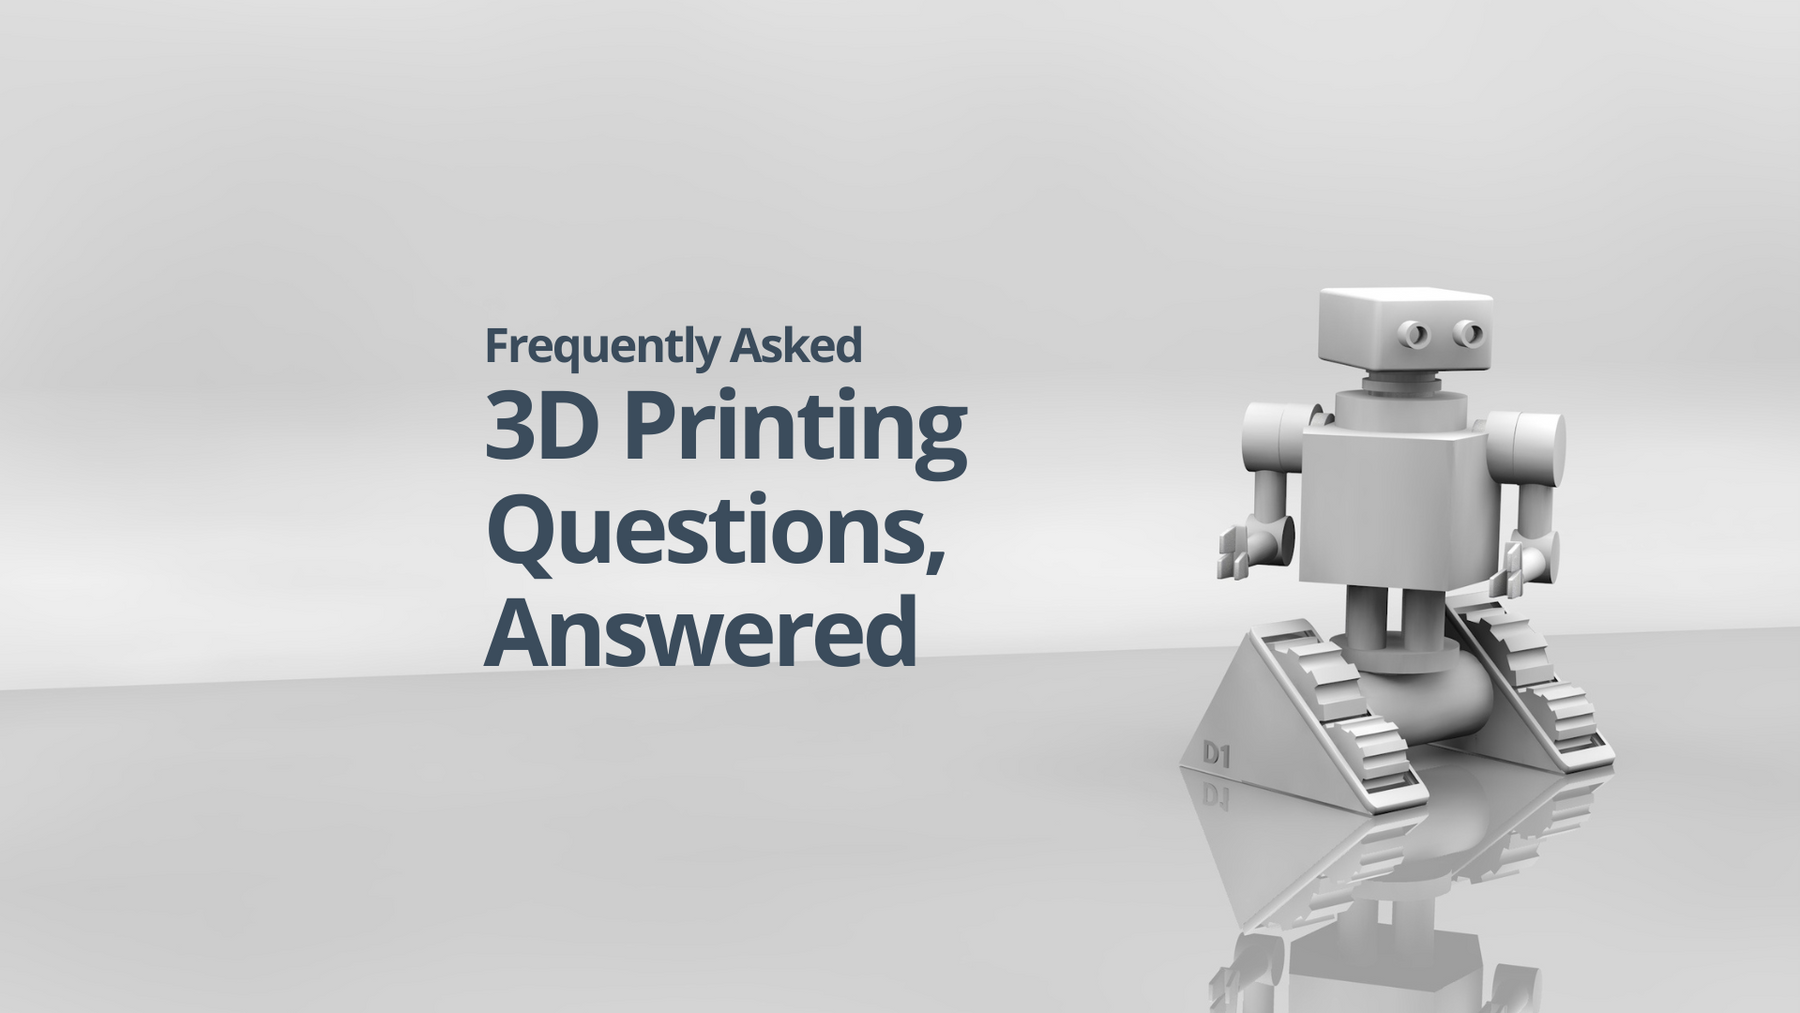 Frequently Asked 3D Printing Questions Answered